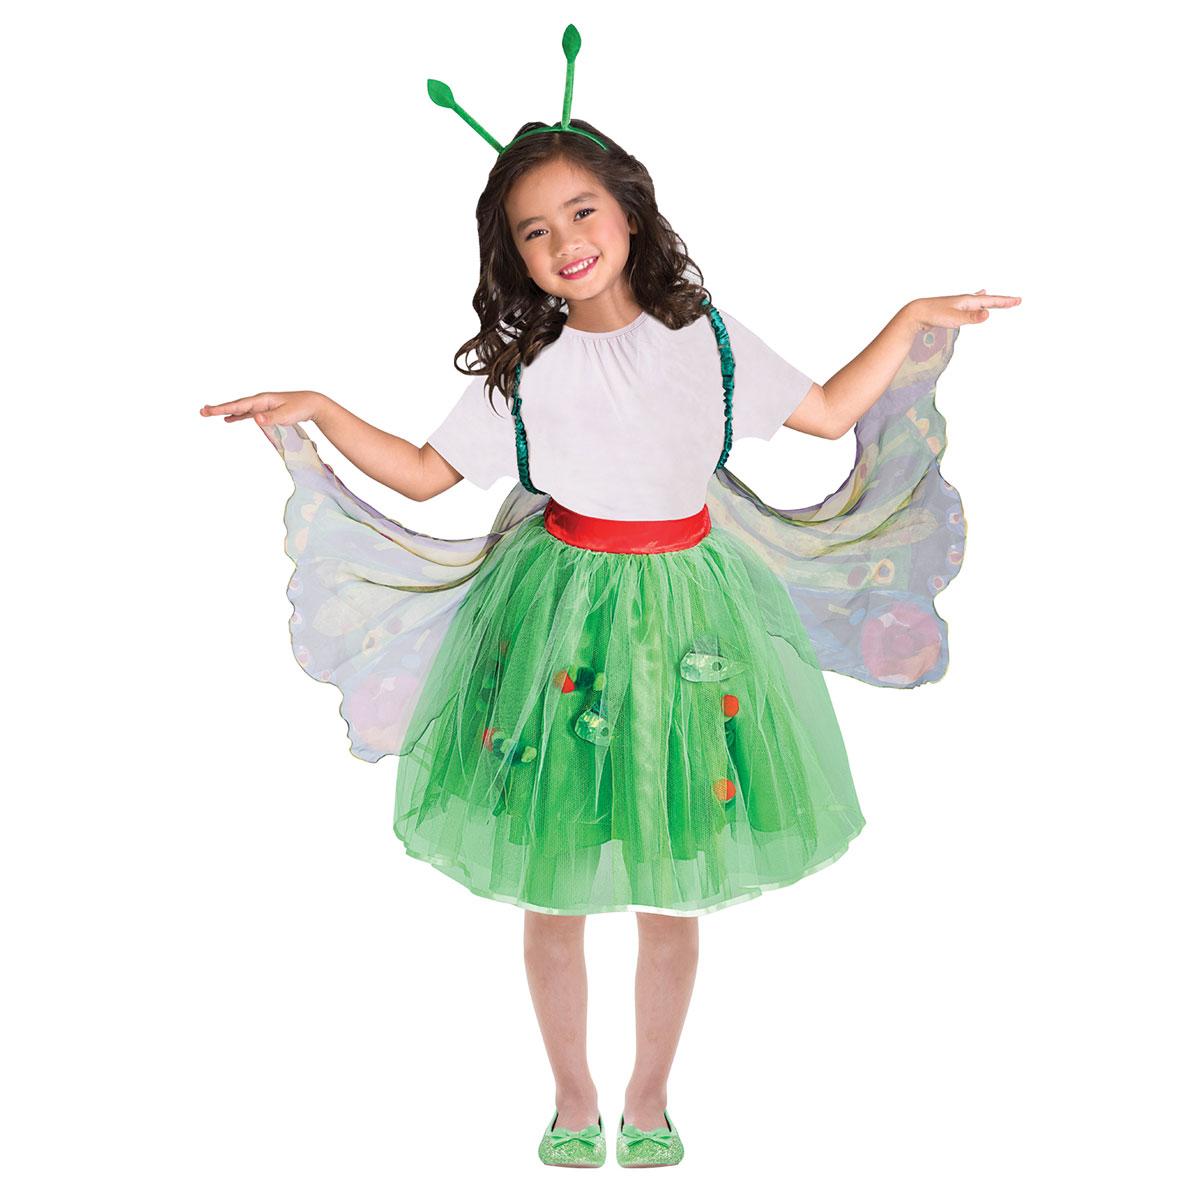 Girl's Hungry Caterpillar Fancy Dress Costume by Amscan 9902977 available here at Karnival Costumes online party shop